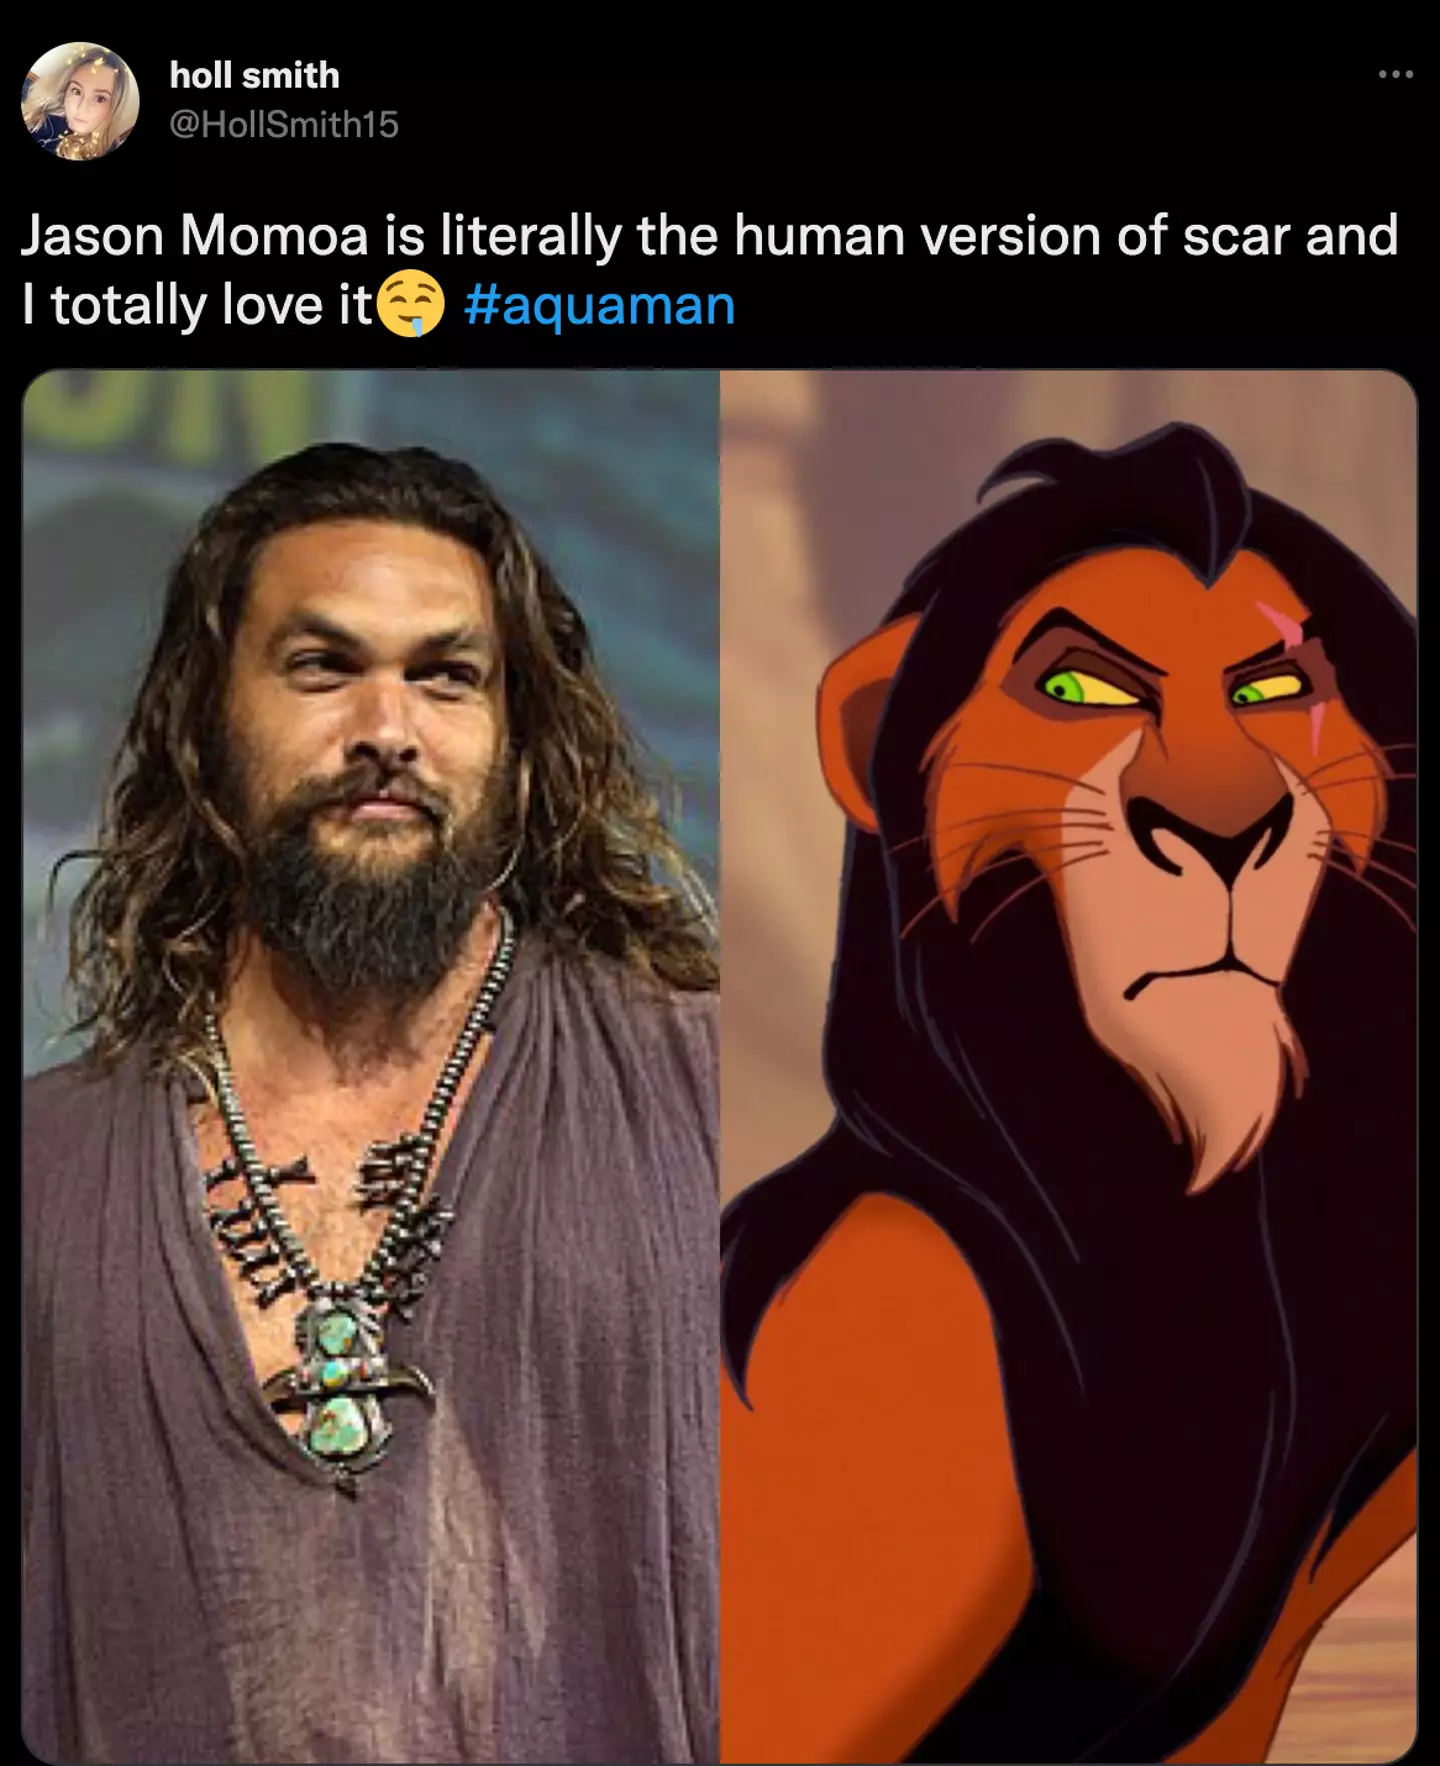 Fans have flocked to Twitter to weigh in on how Momoa got his scar.